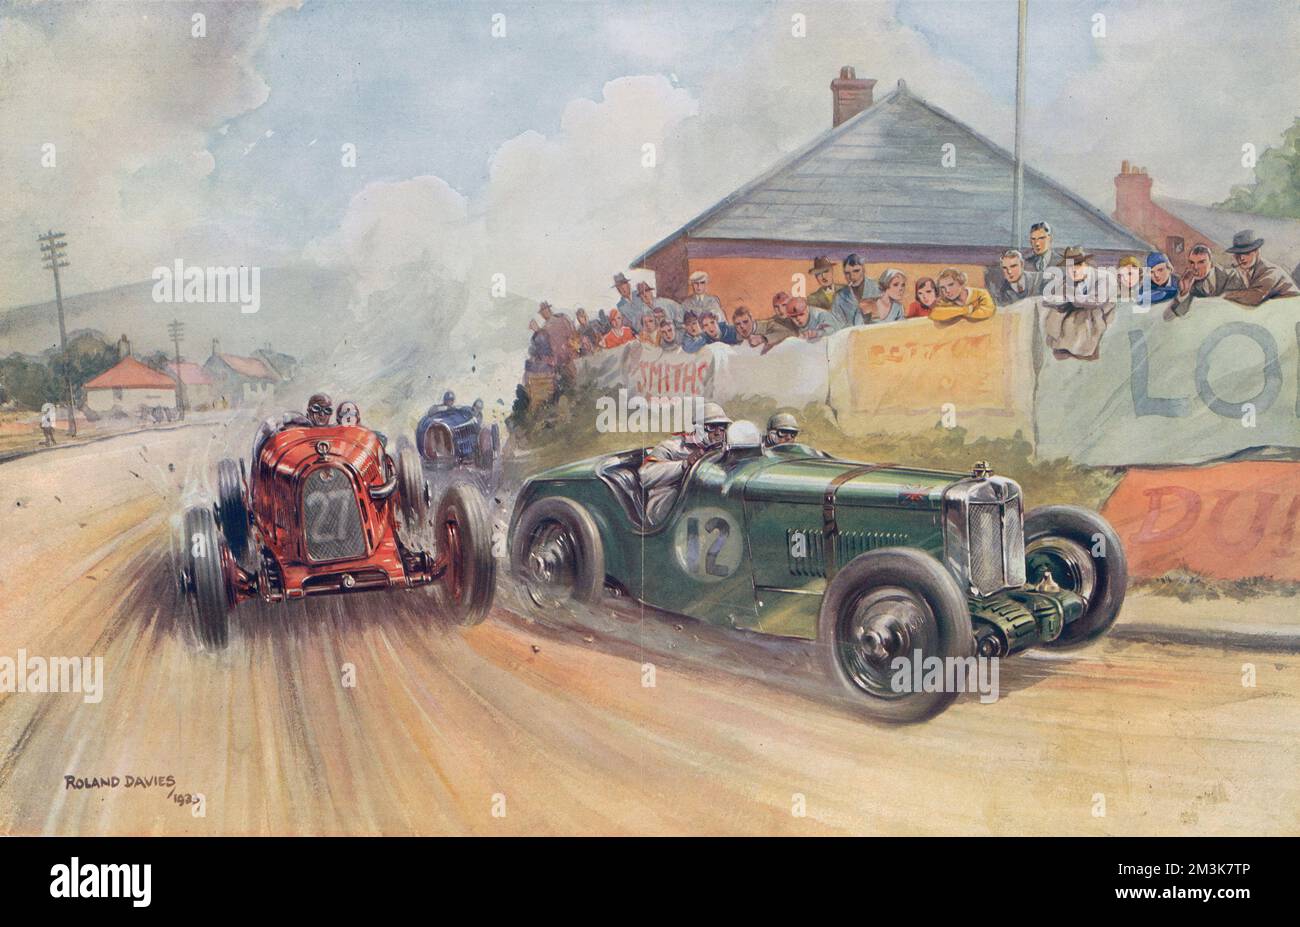 A colour illustration by Roland Davies depicting an exciting moment during the RAC Tourist Trophy Race on the Ards Circuit in Ulster in 1933.  The picture shows a red Italian Alfa Romeo gaining on a British racing green M.G.  In 1933, there were thirty entries for the race.  The Ards circuit had to lapped thirty times, with houses on the route sandbagged to avoid damage on what was described as a 'hair-raising' drive.     Date: 13th September 1933 Stock Photo